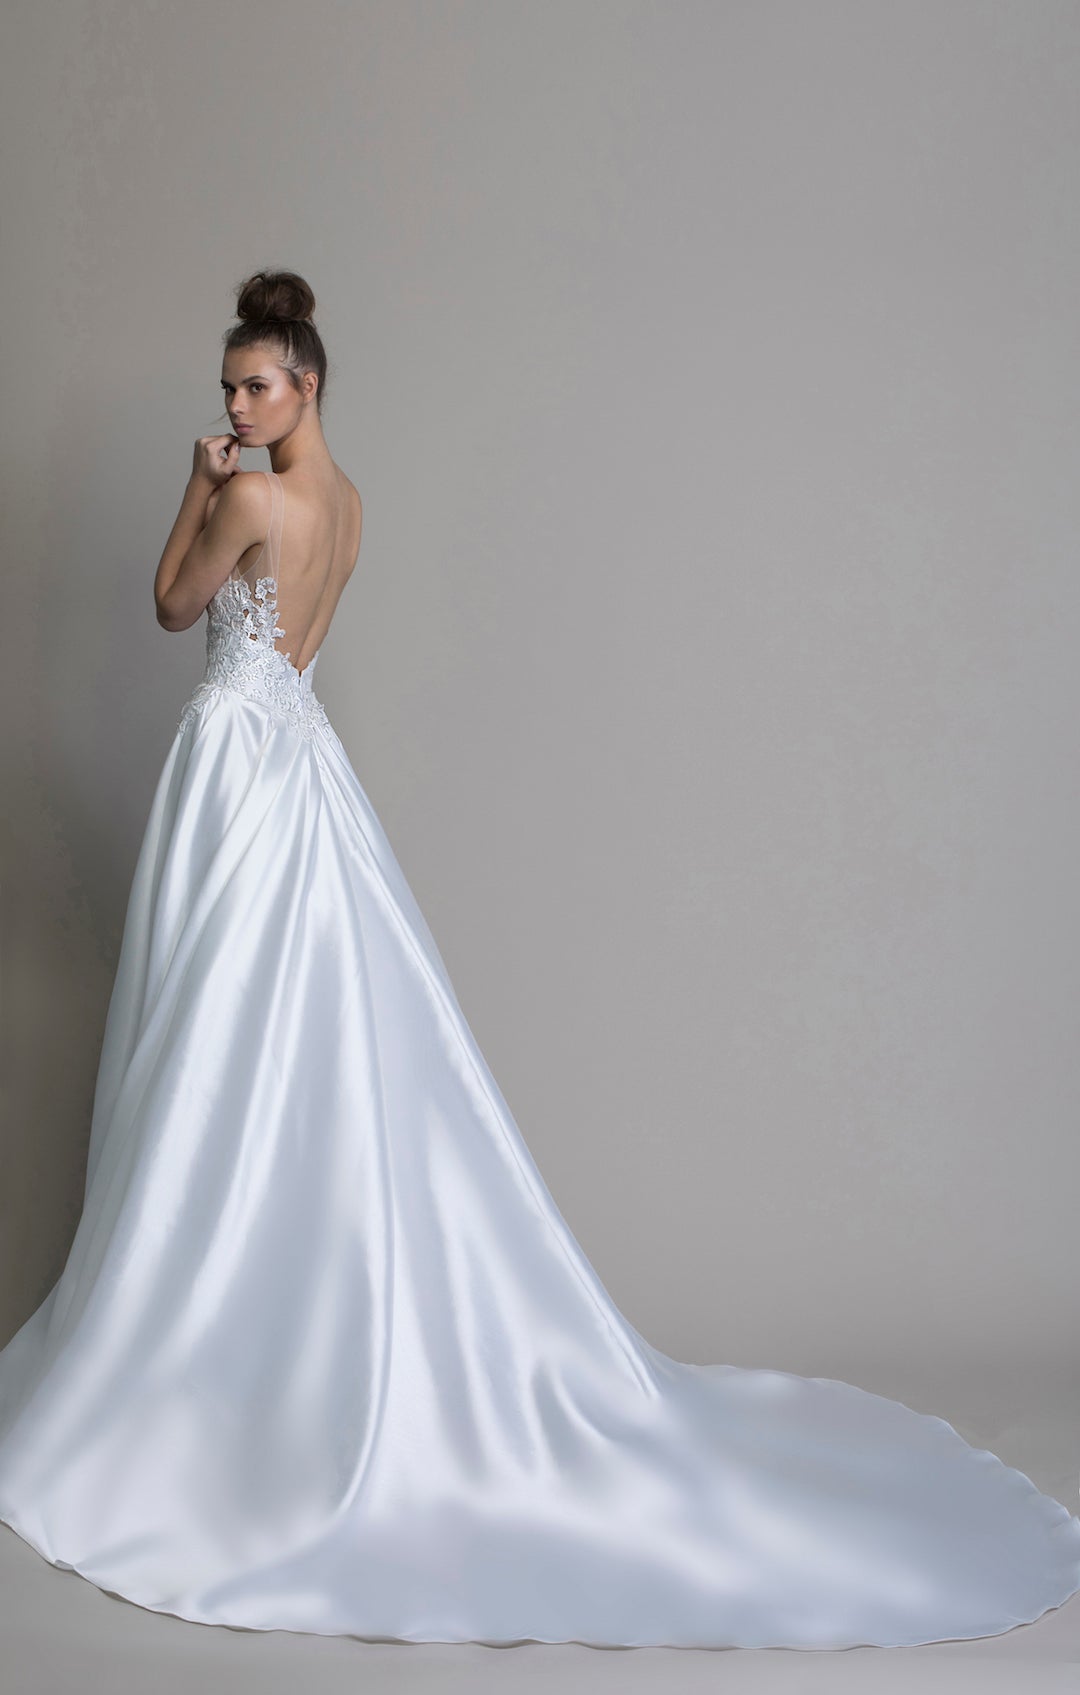 Pnina Tornai's new LOVE 2020 Collection is out! This is style 14762